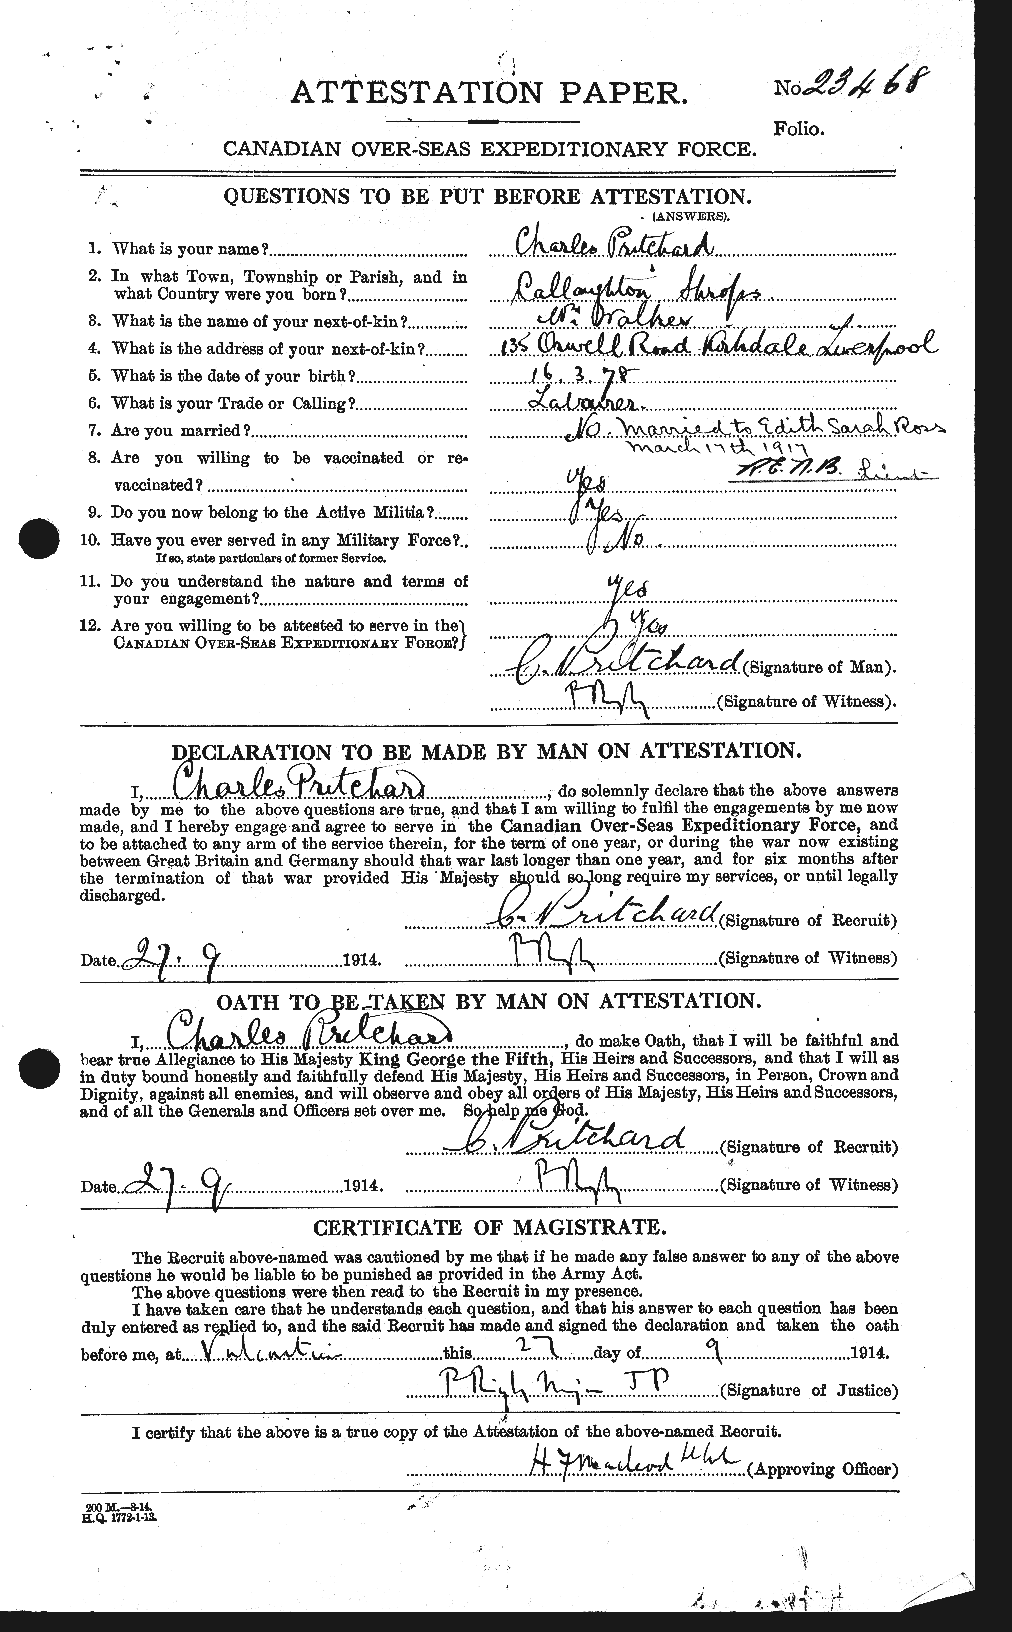 Personnel Records of the First World War - CEF 588493a